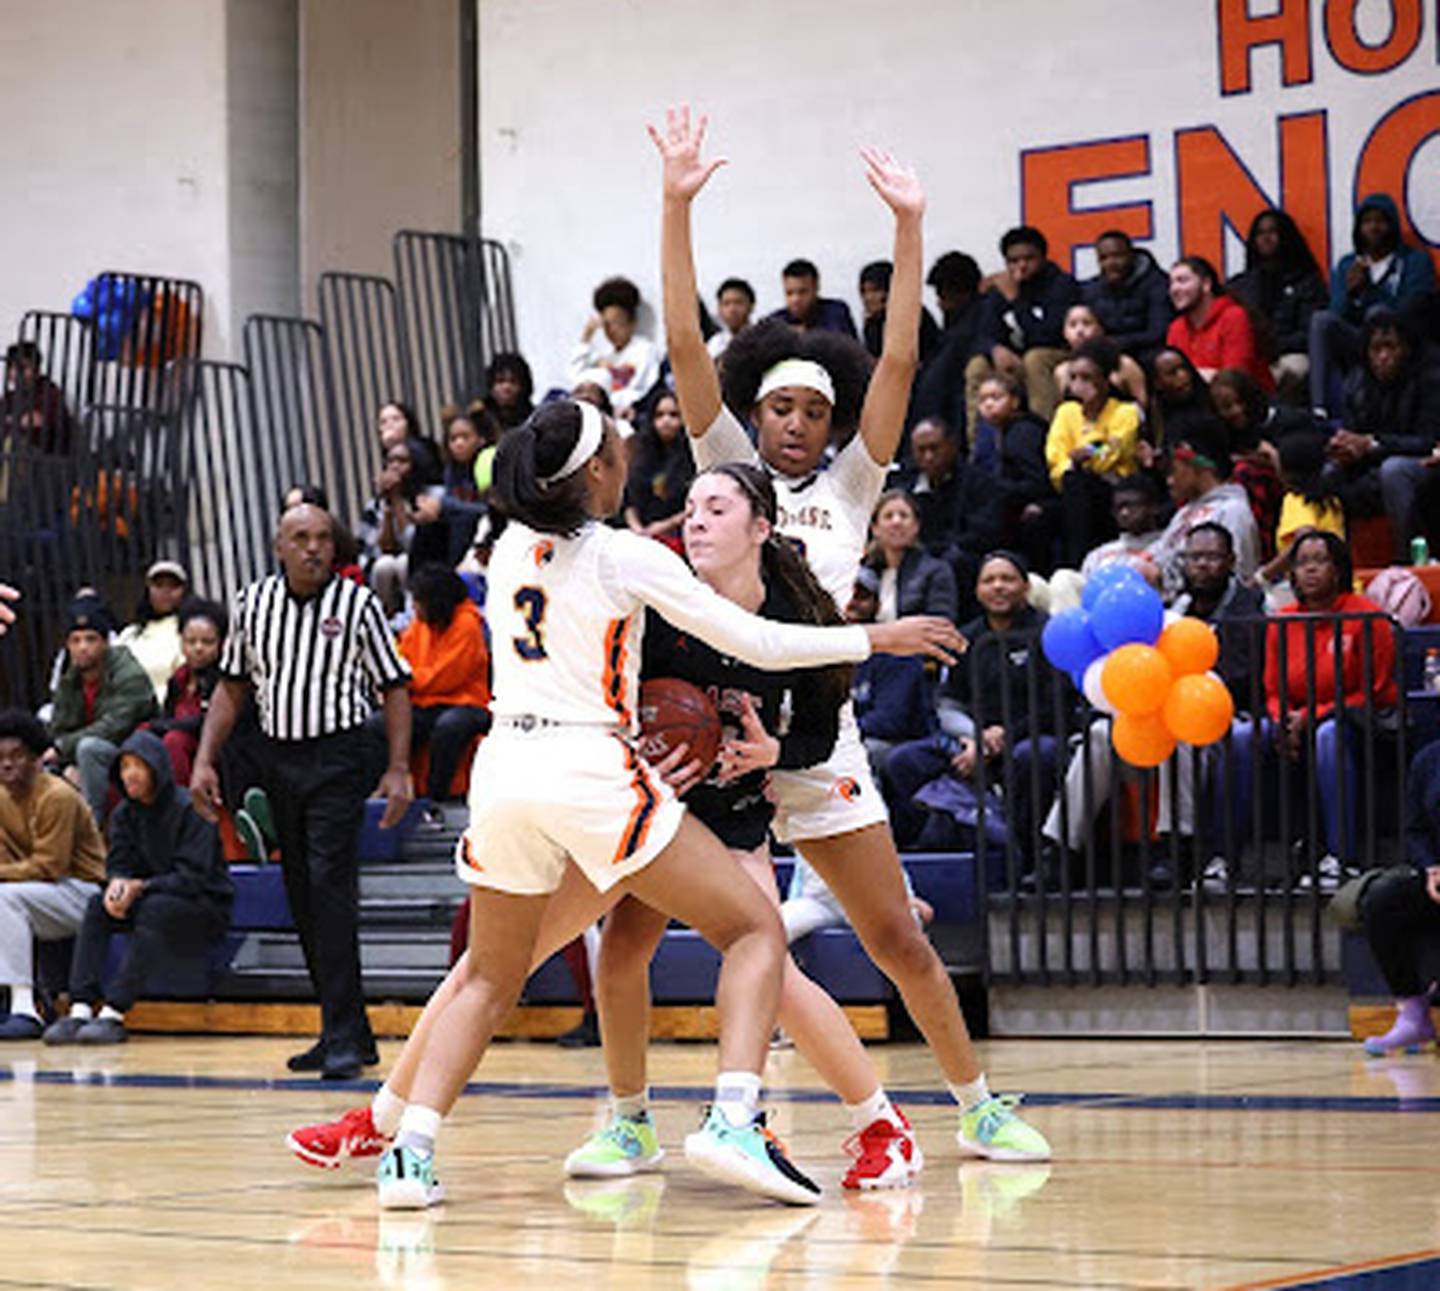 Poly's Da'Brya Clark (3) and Trinity Massenburg double-teams Mercy's Logan Jefferson during Thursday's girls basketball contest. The No. 2 Engineers held eighth-ranked Mercy to two points in the second quarter, paving the way to a 57-42 non-league victory in Northwest Baltimore.